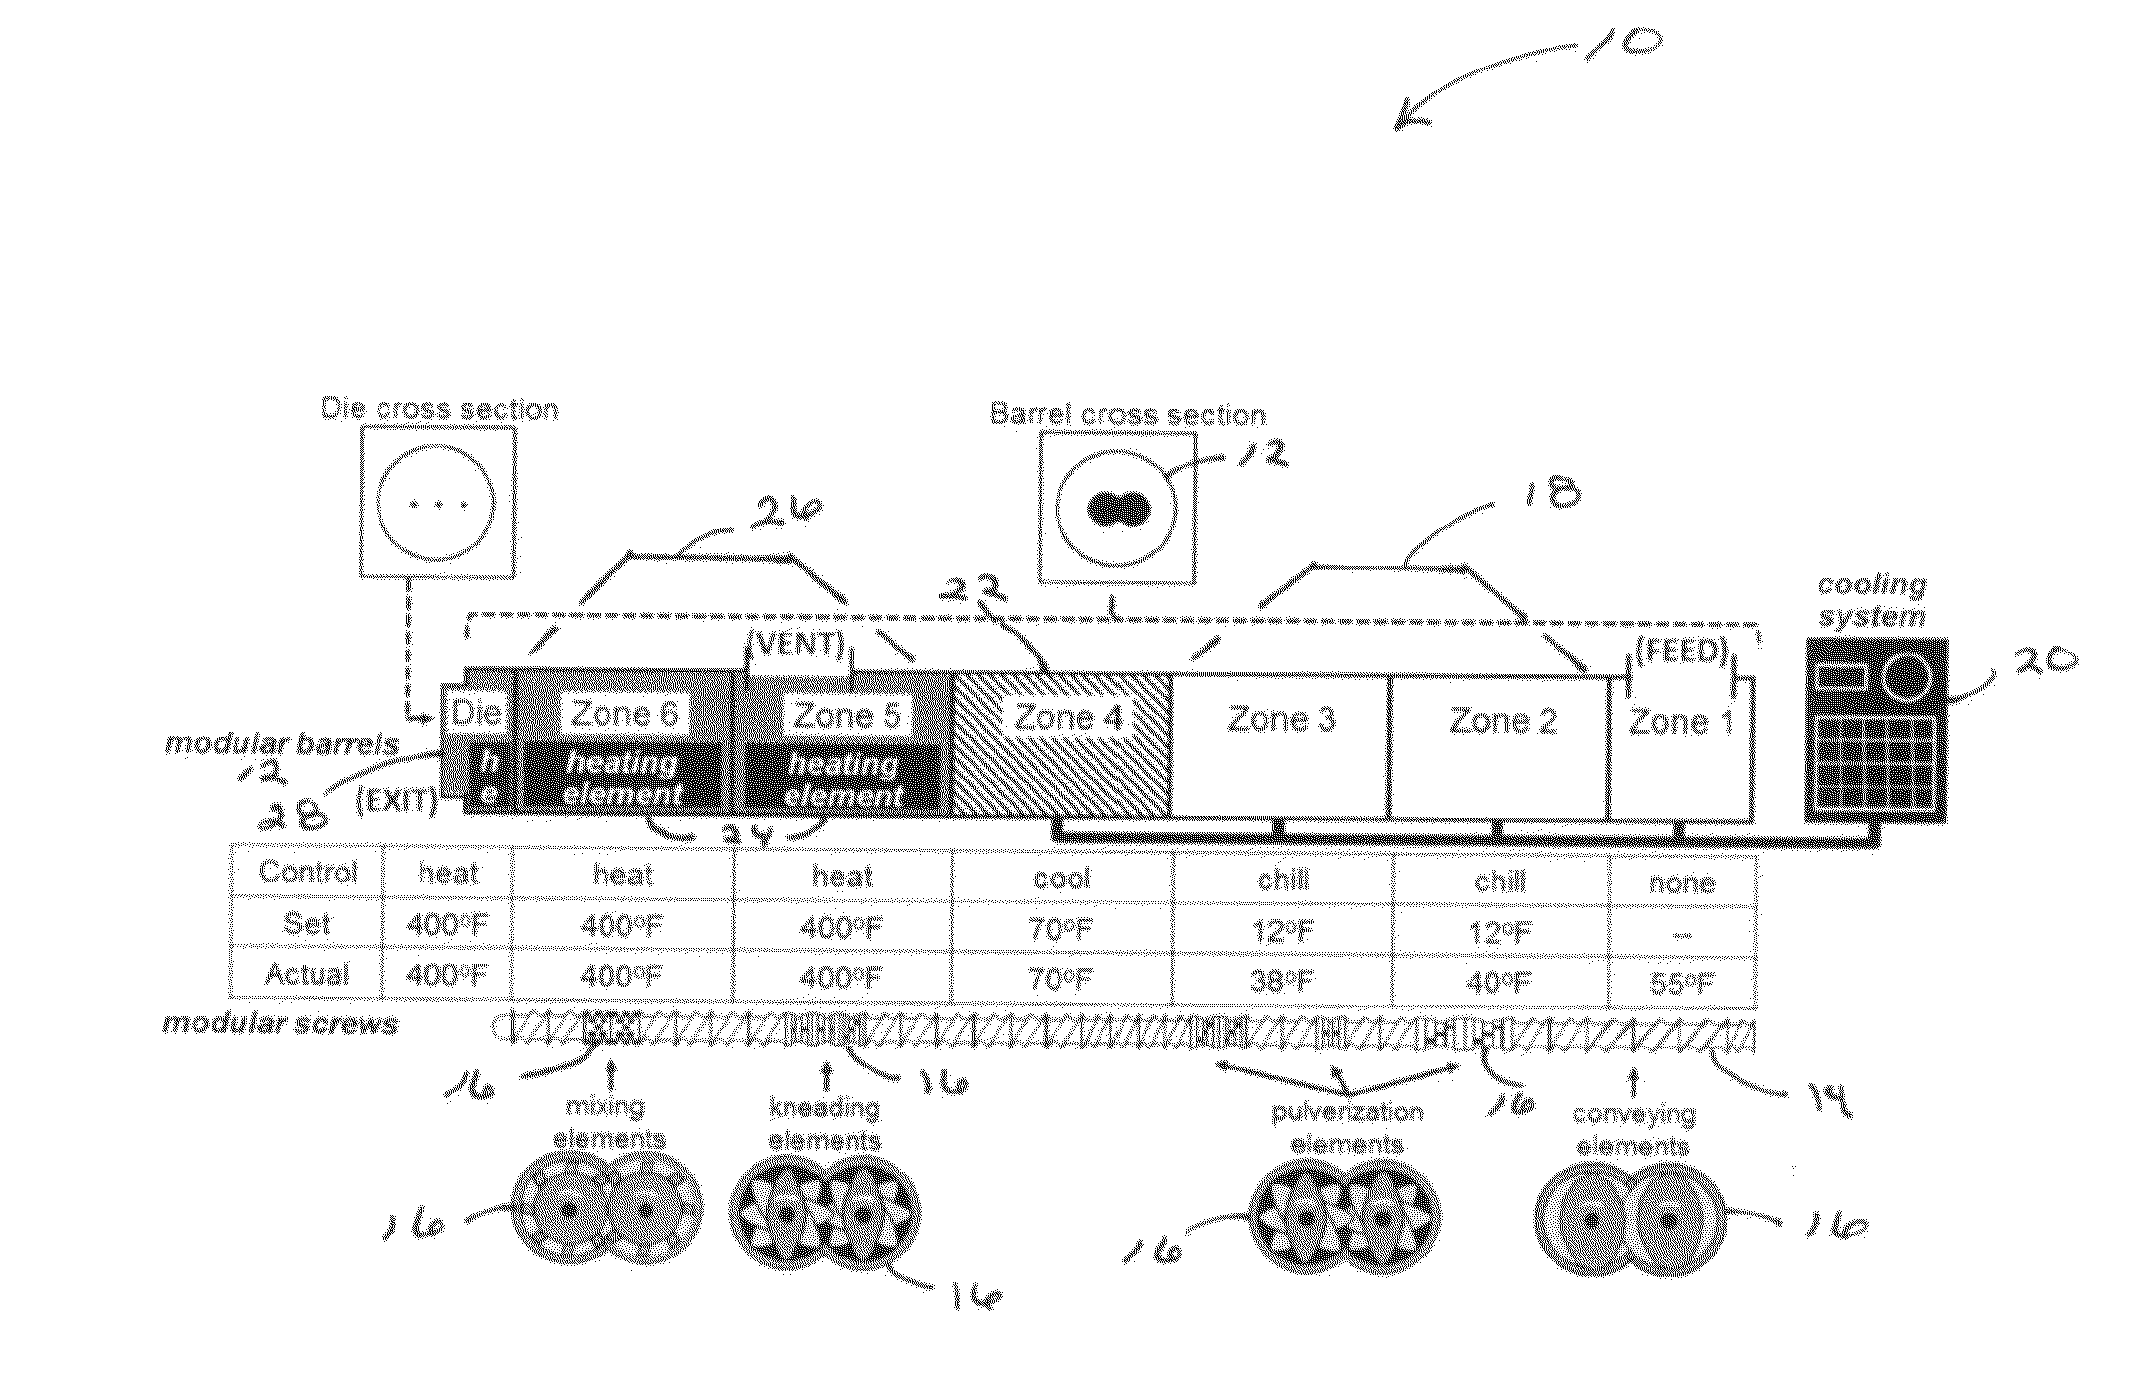 Process for Producing Exfoliated and/or Dispersed Polymer Composites and/or Nanocomposites via Solid-State/Melt Extrusion (SSME)